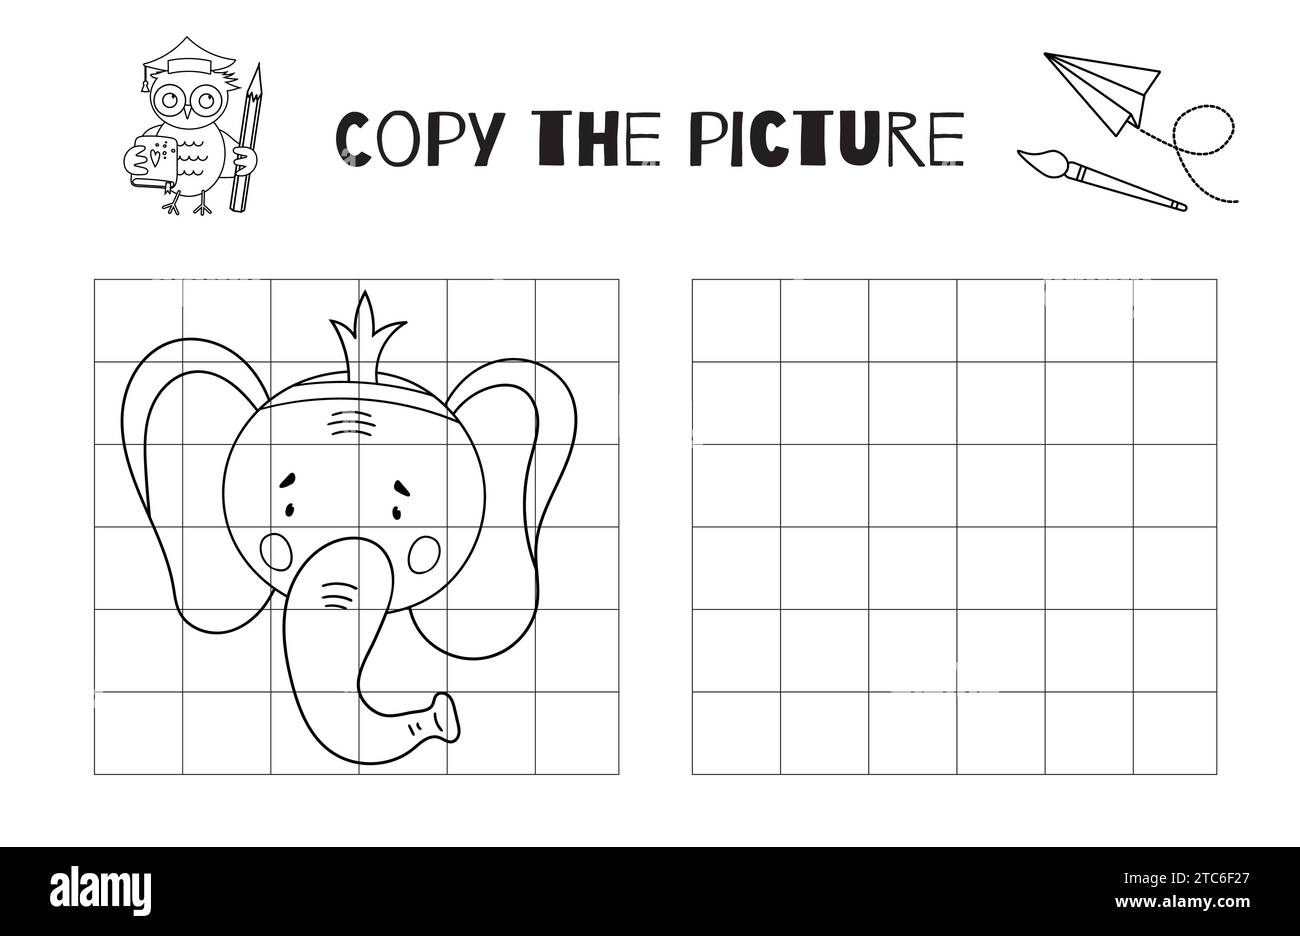 In This Vector Drawing Practice Worksheet, Kids Can Enjoy A Carnival-Themed New Year Activity By Copying Or Completing The Black And White Printable Image Of An Elephant Wearing A Crown Stock Vector